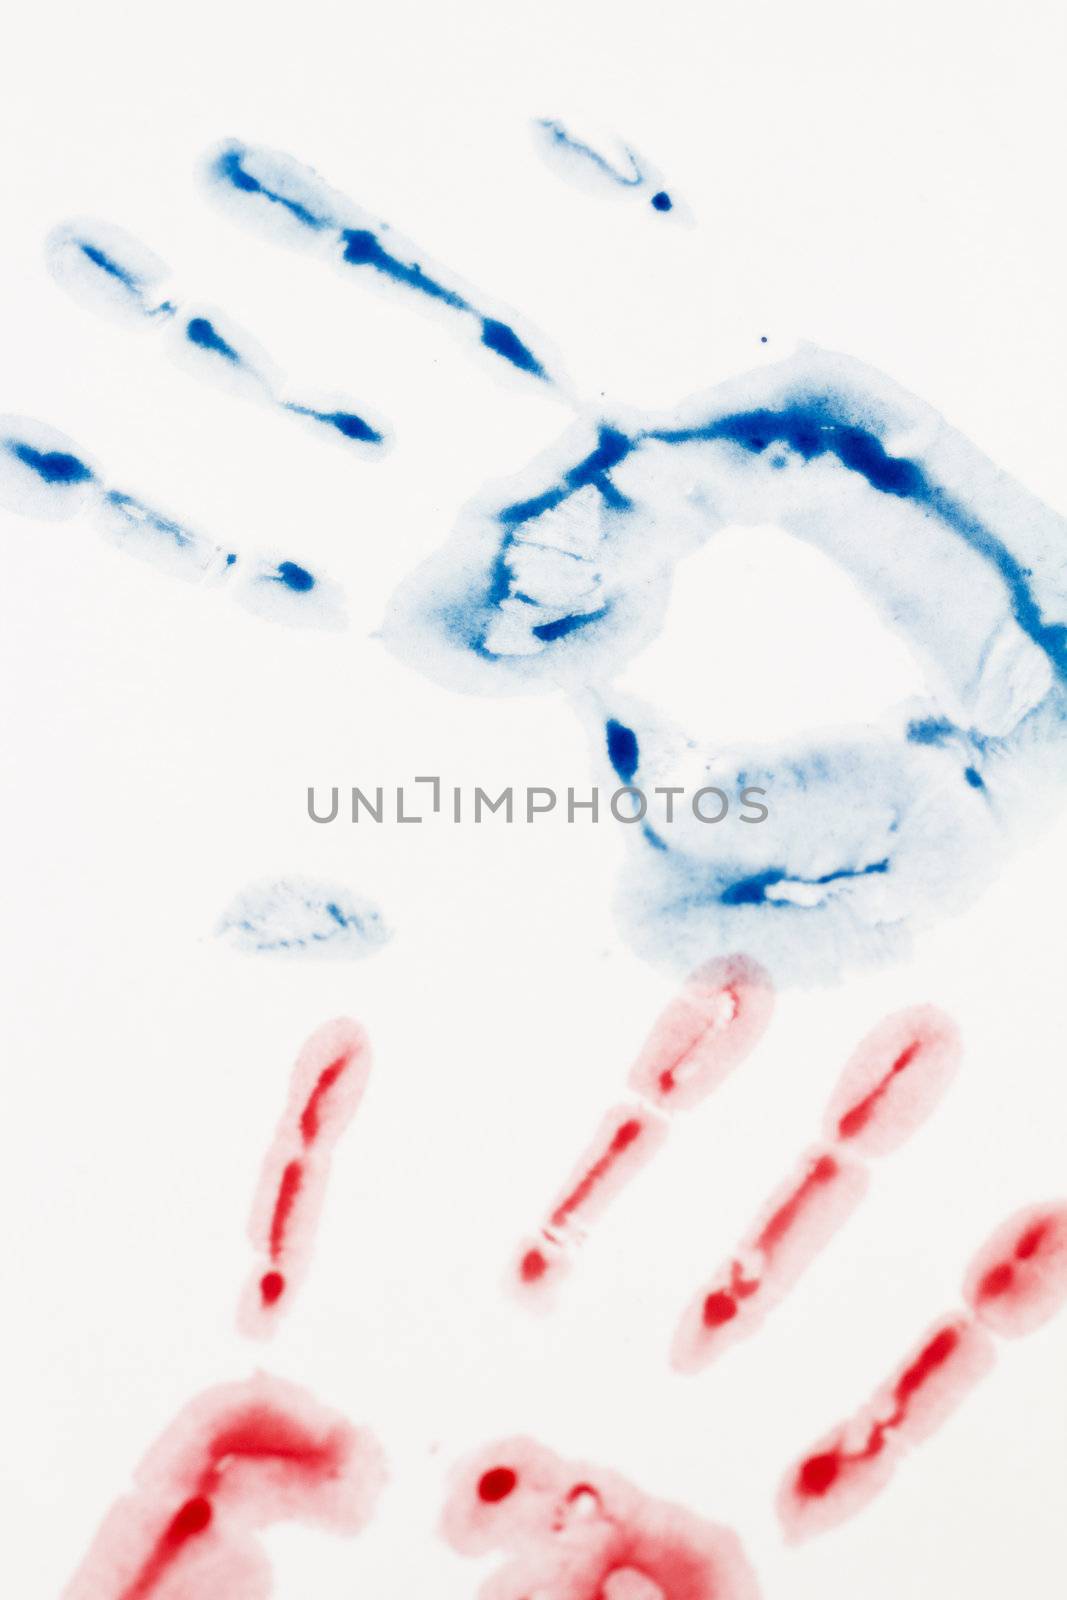 Blue and red hand-print shape over white background